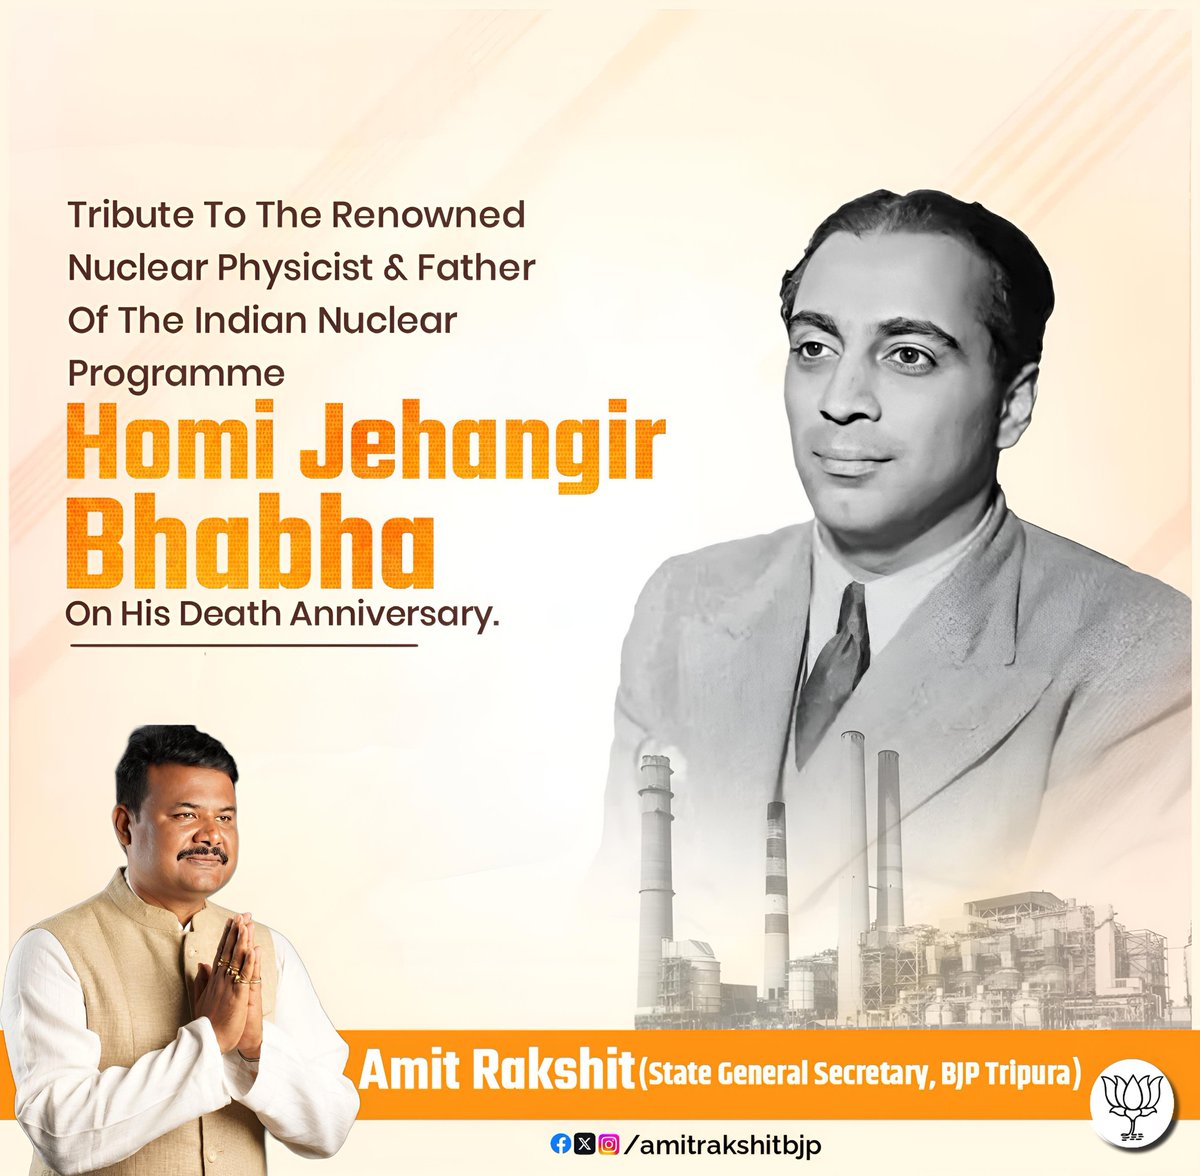 Paying homage to Homi J. Bhabha on his death anniversary, the architect of India's nuclear program. His groundbreaking work continues to fuel India's progress in science and technology.

We honor his enduring impact in pushing the frontiers of knowledge.
#HomiBhabha